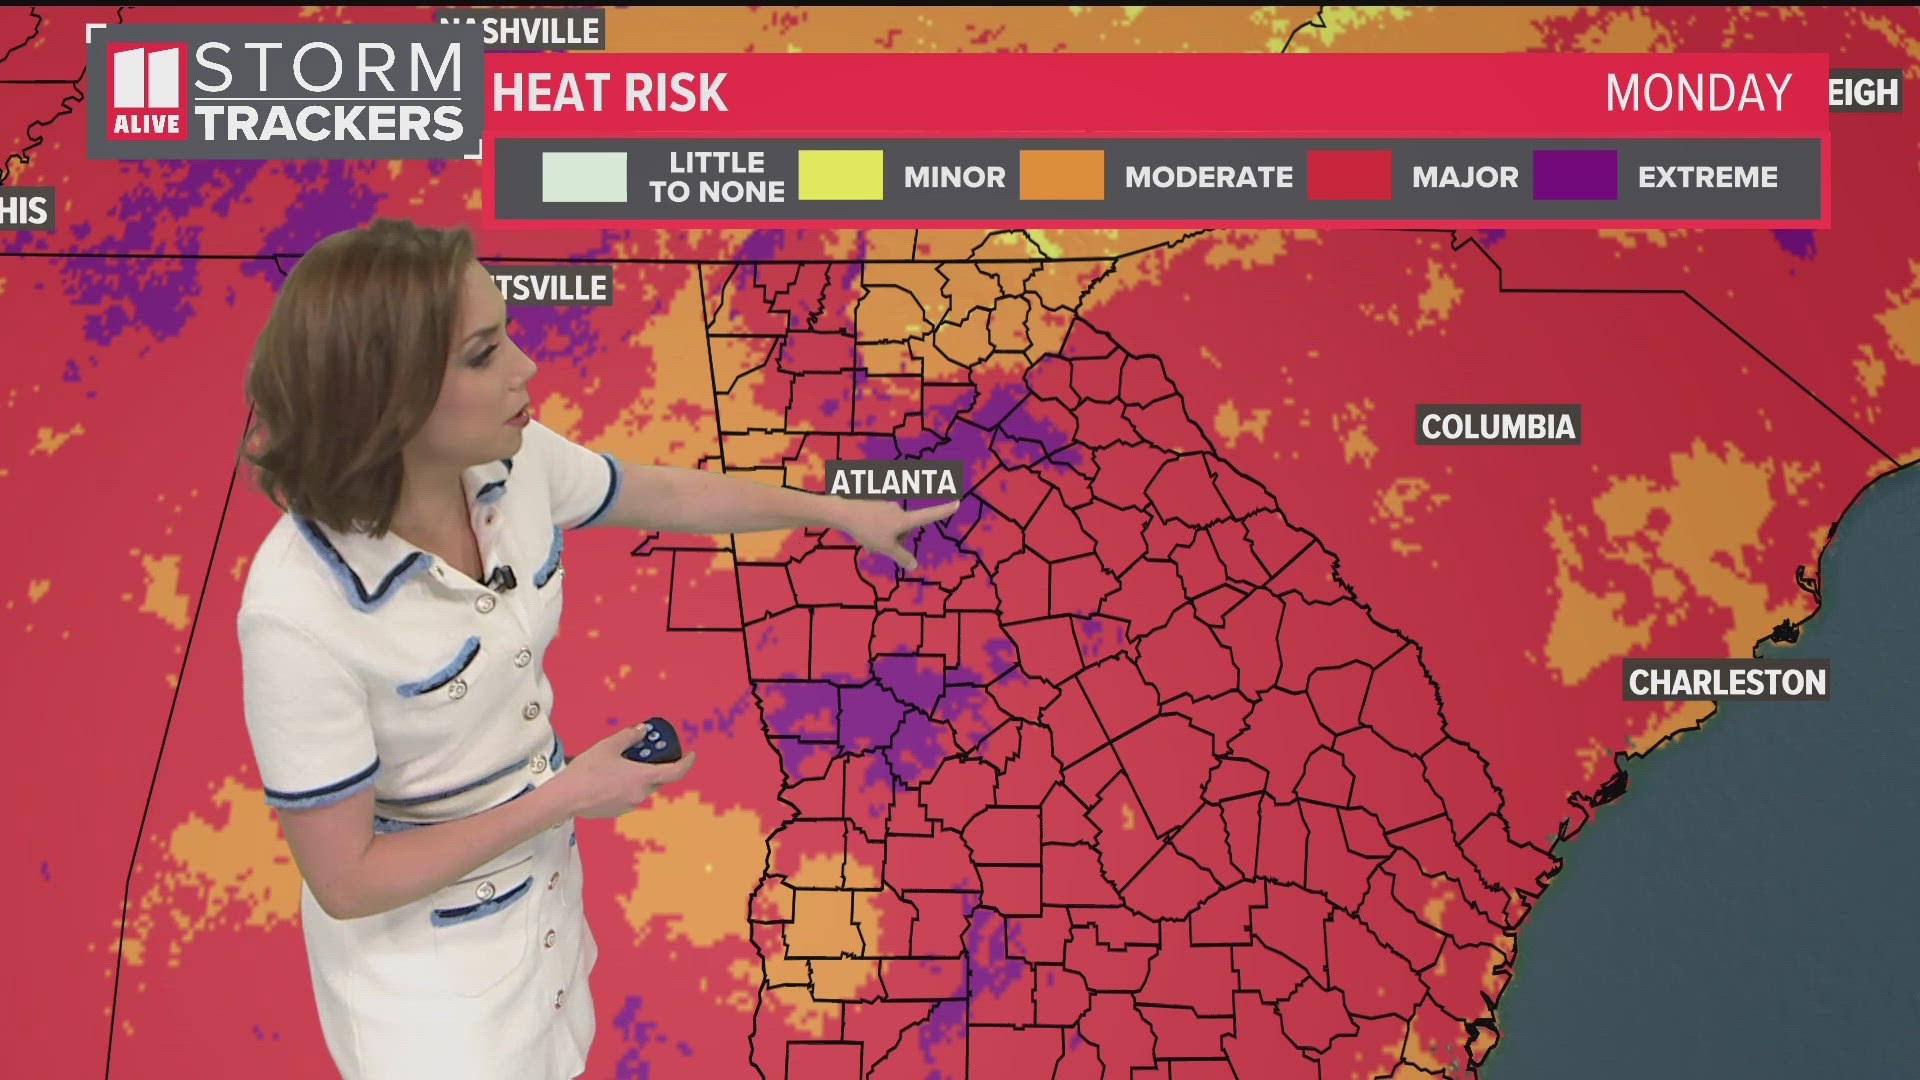 The heat wave will intensify this weekend and into early next week across north Georgia